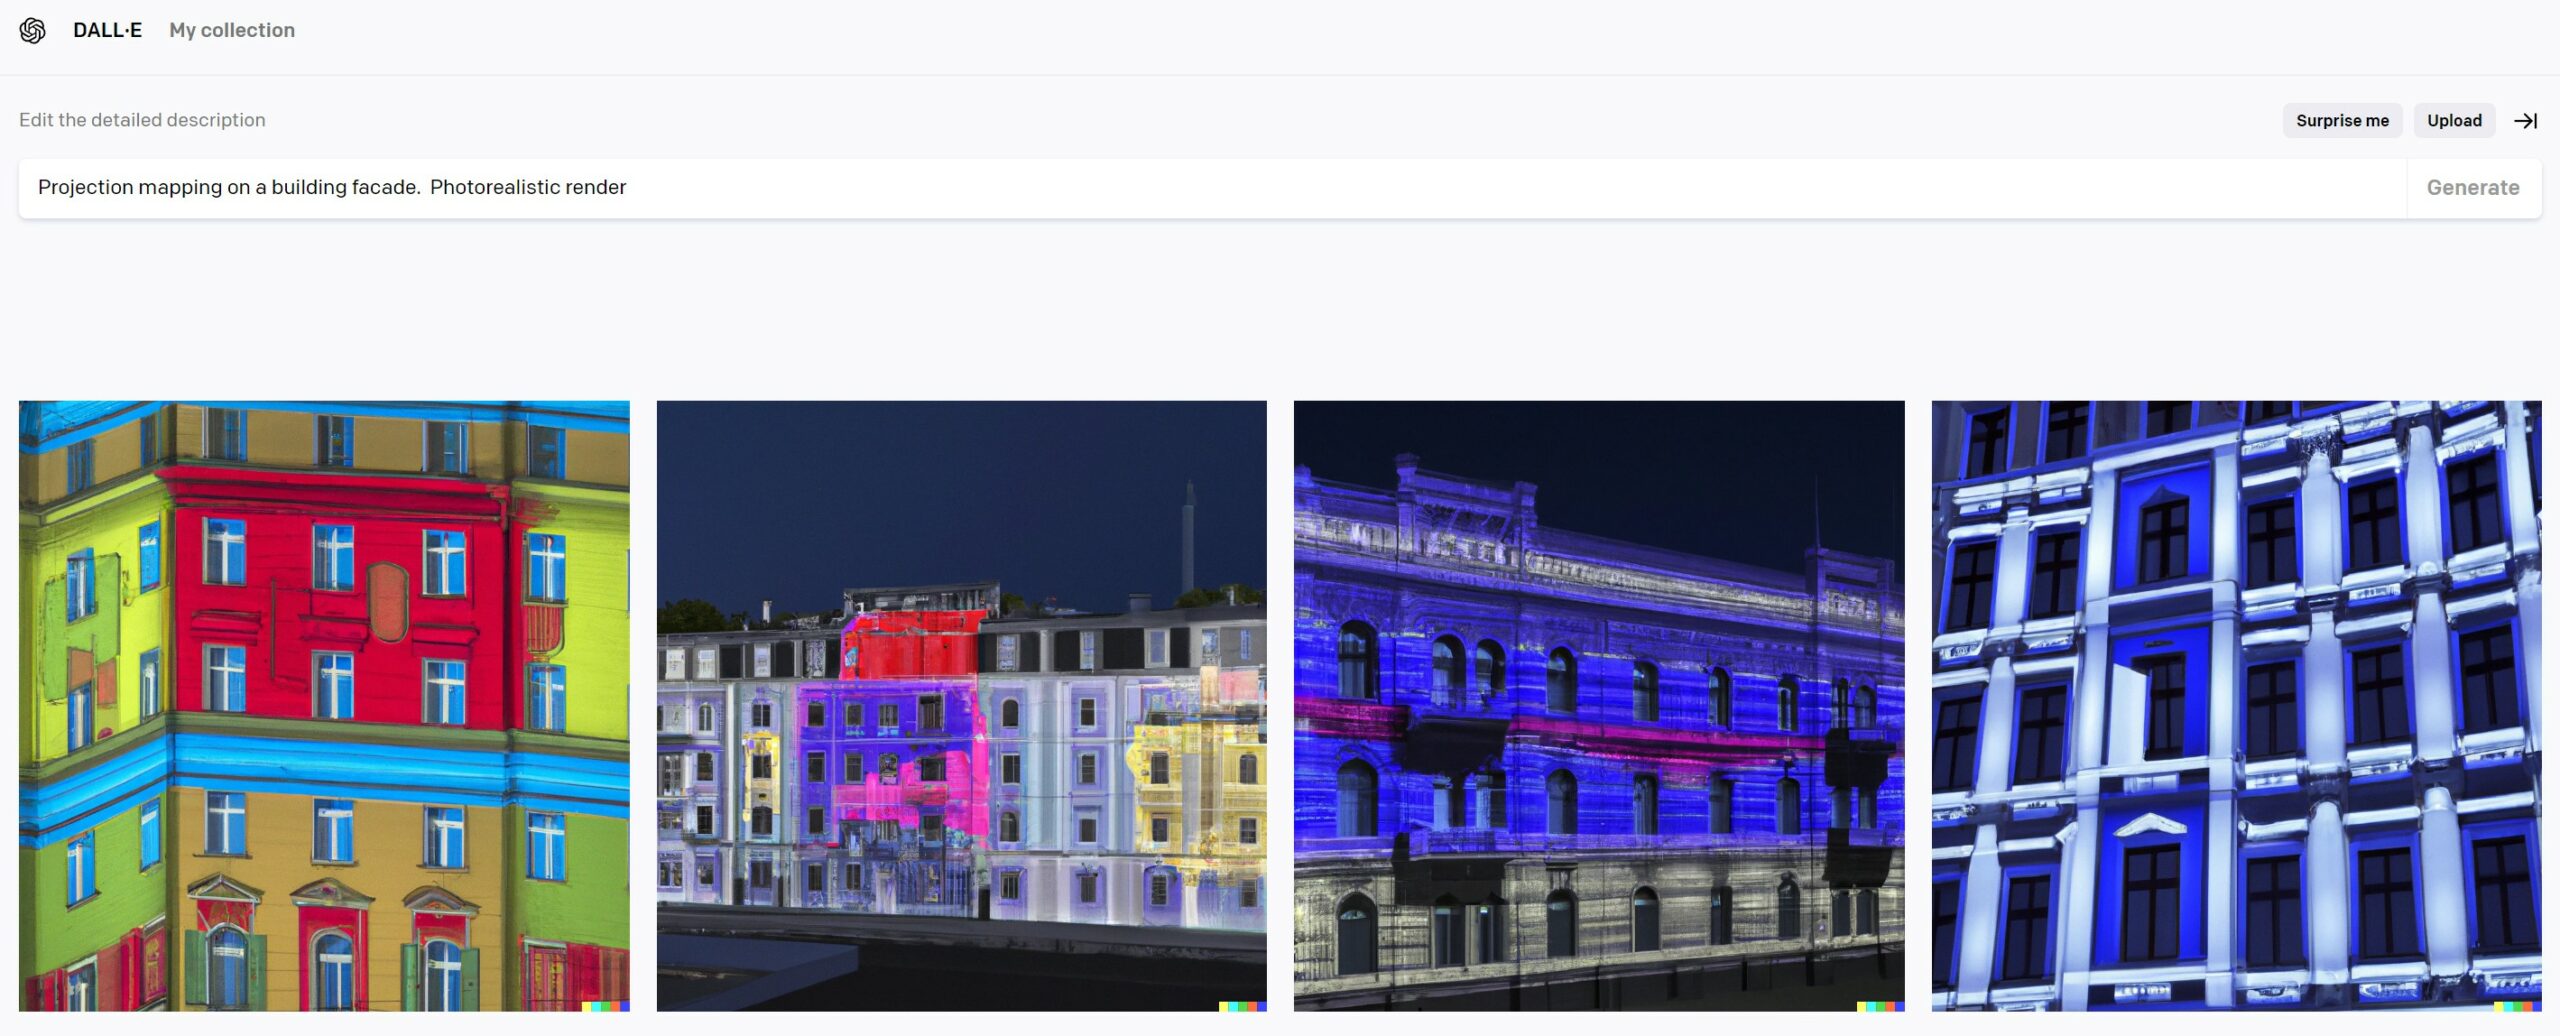 Projection mapping on a building facade